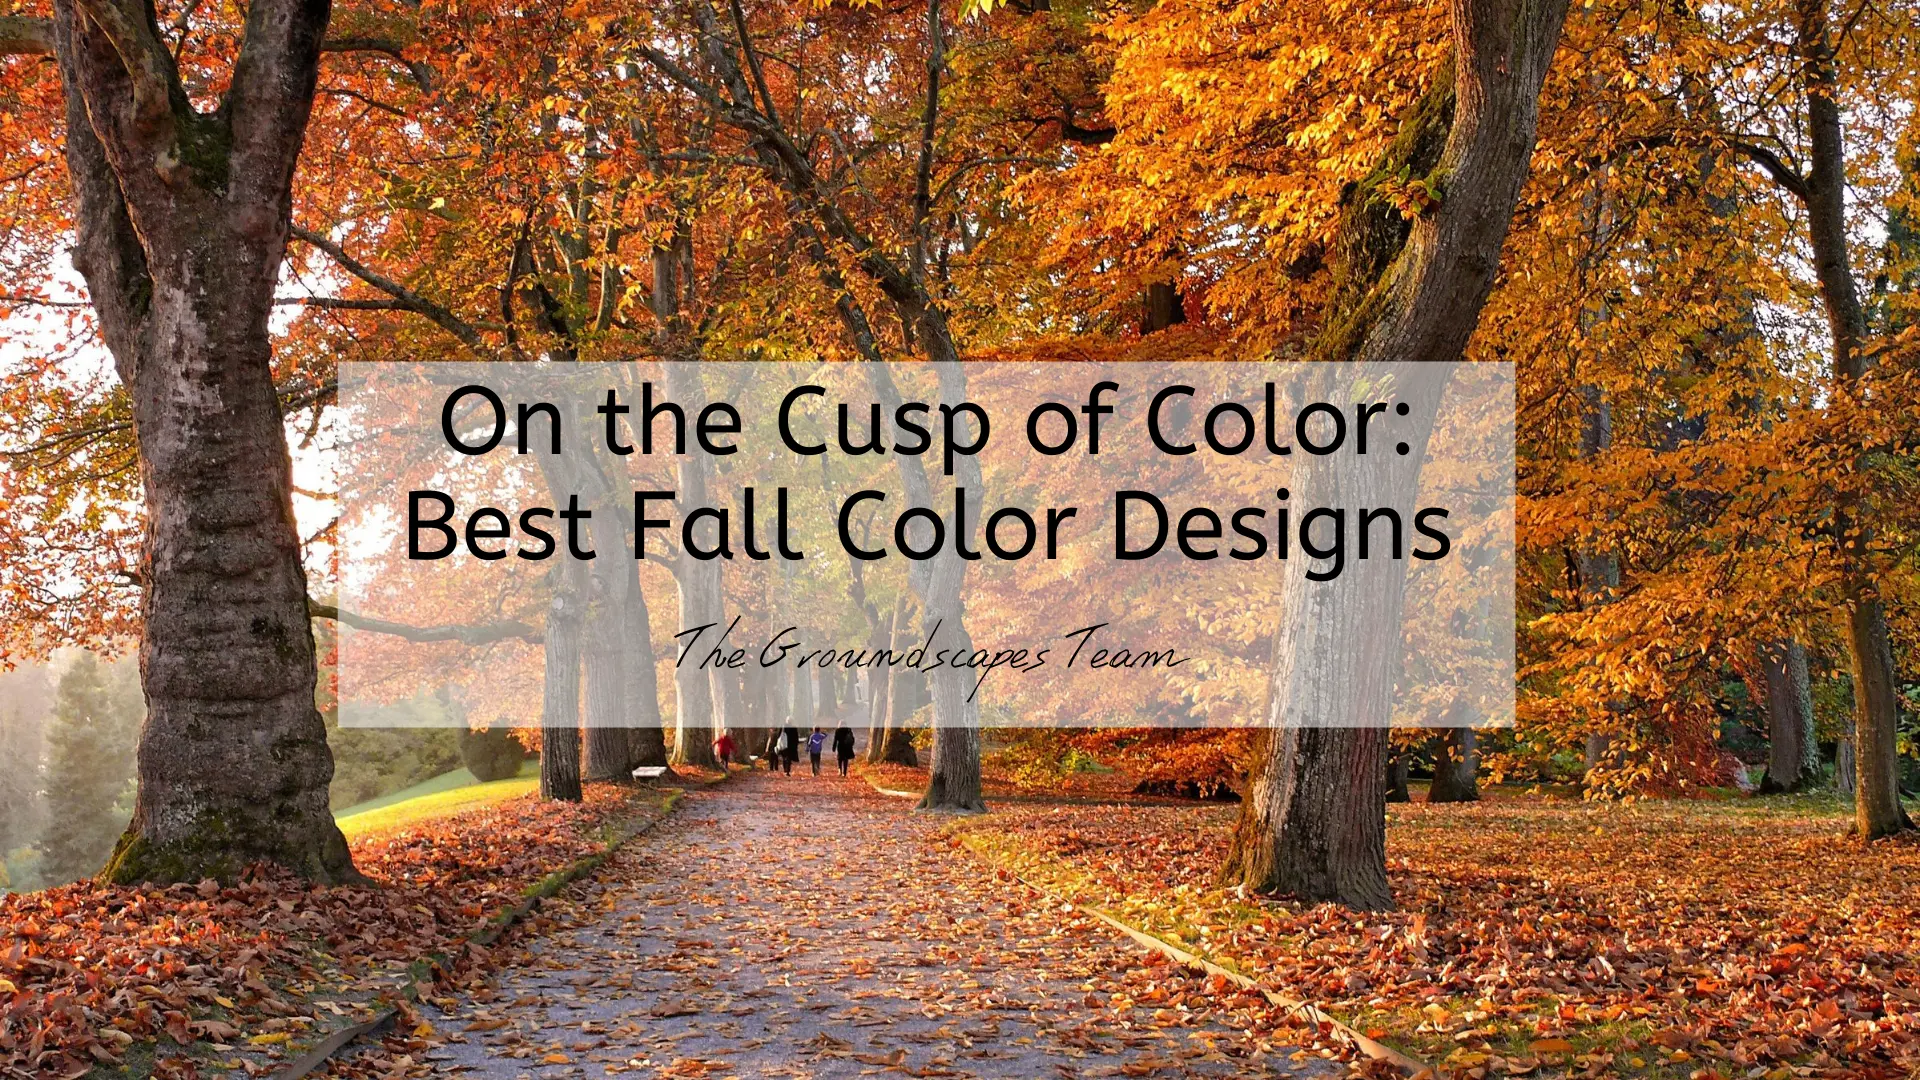 On the Cusp of Color: Best Fall Color Designs